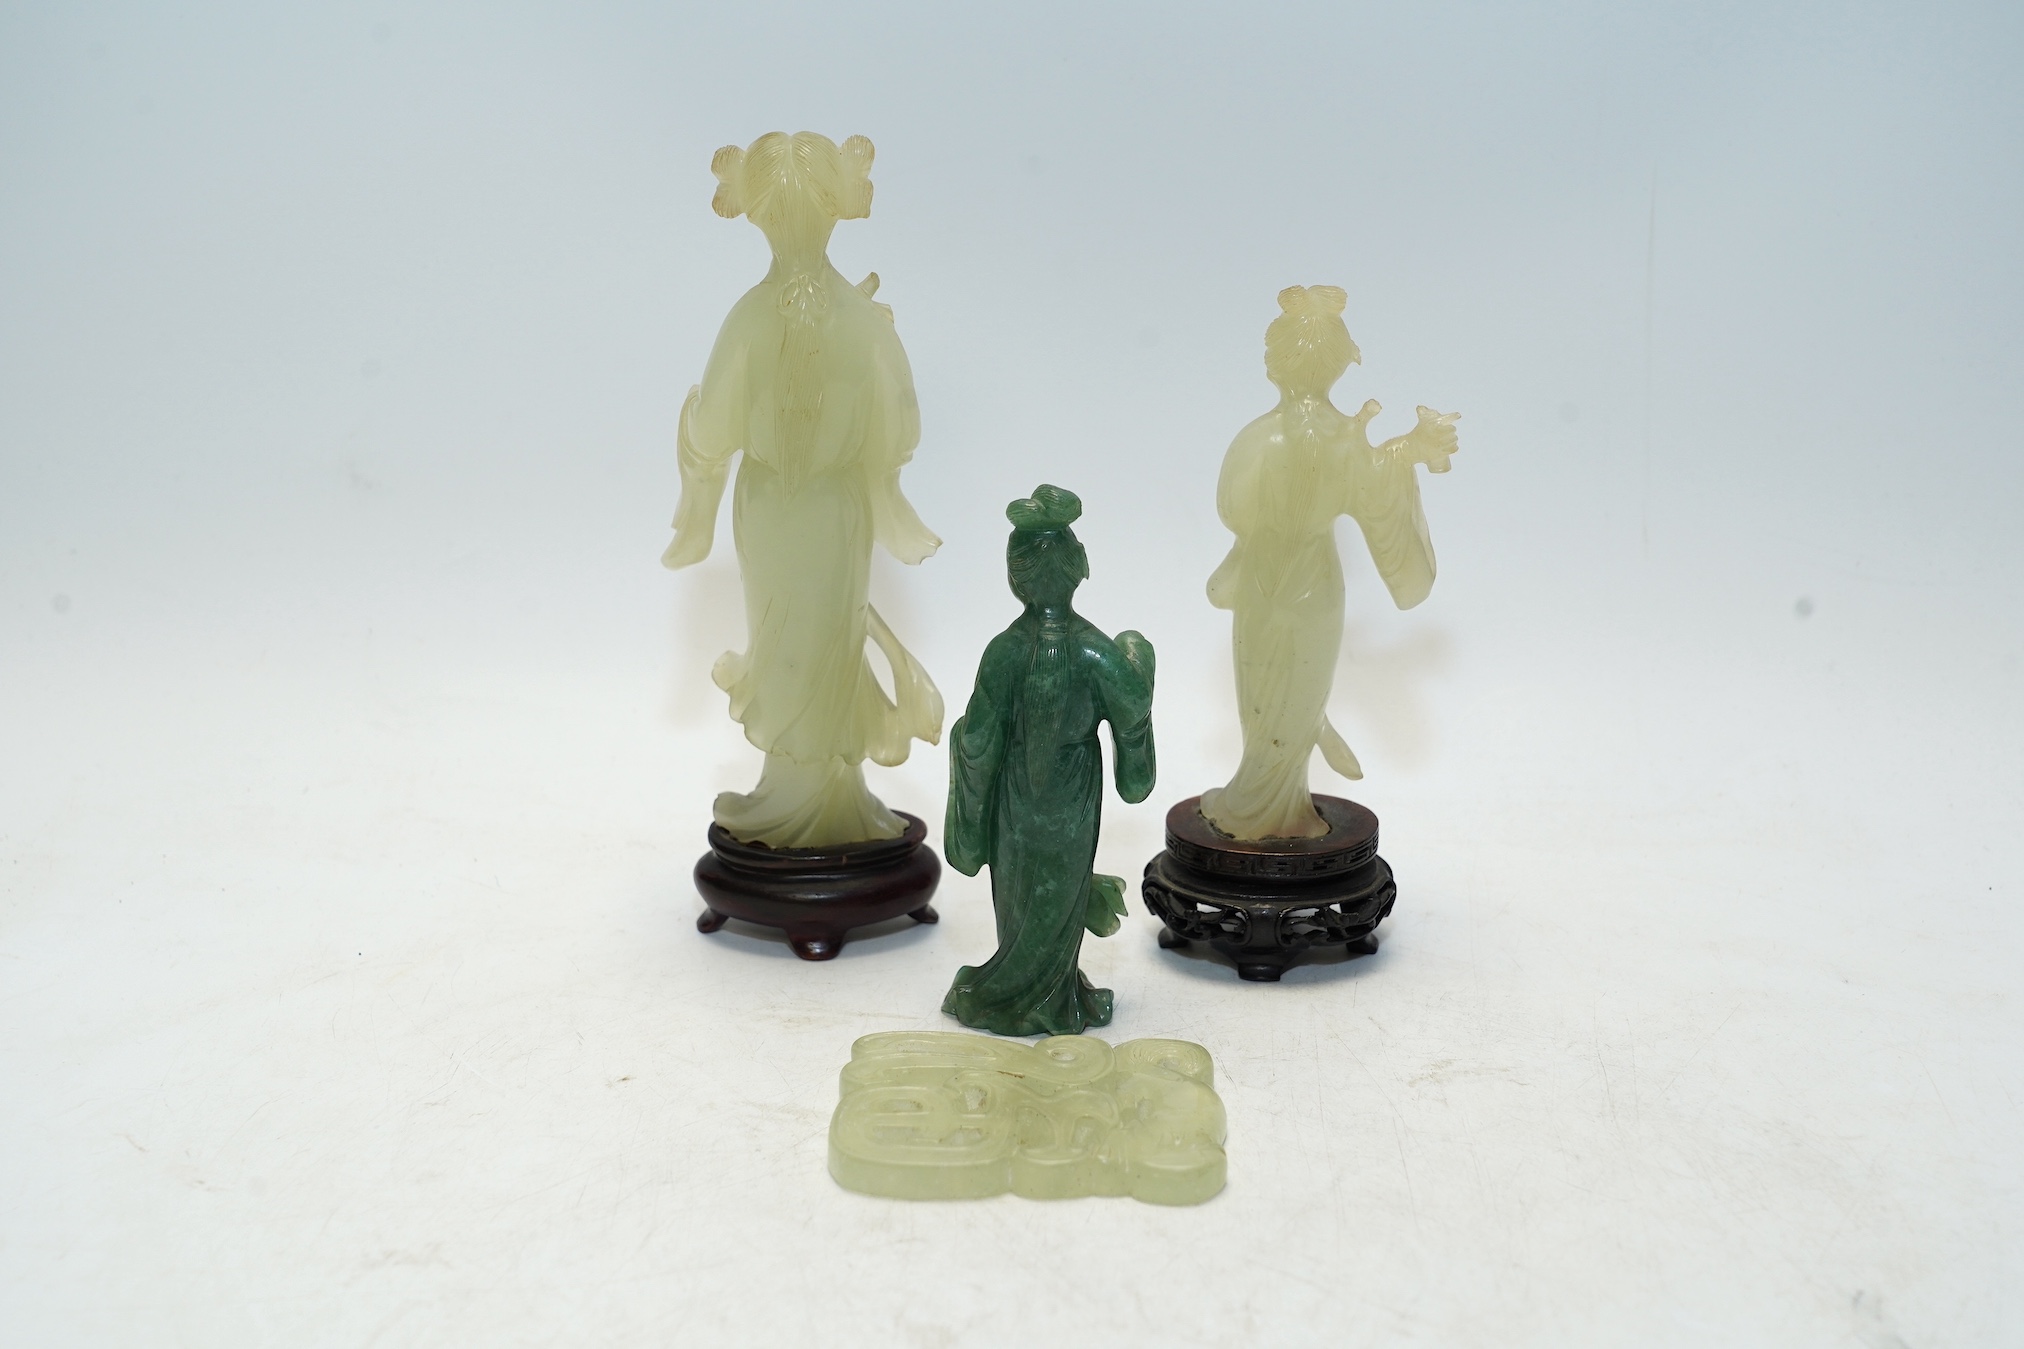 Four Chinese bowenite jade carvings, two on stands, largest 16cm high. Condition - fair to good, one figure with hand missing